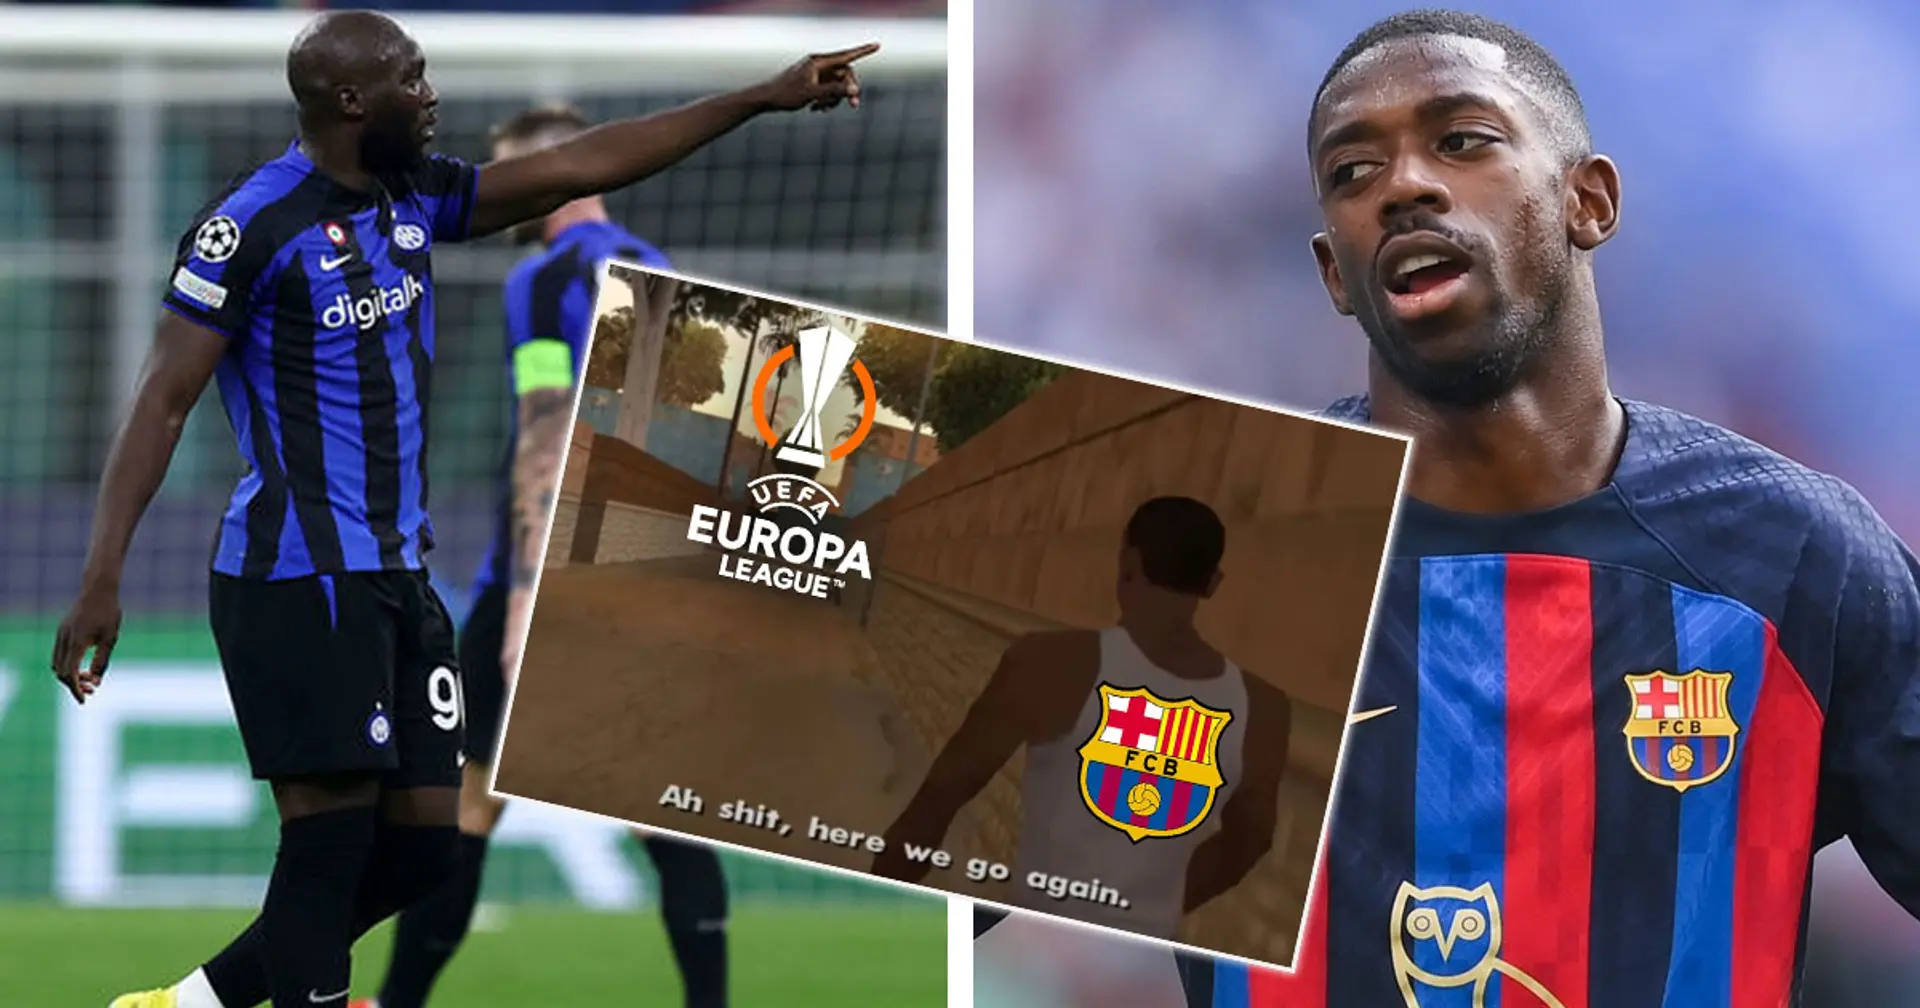 'After 100 levers, they still find themselves in Europa League': Chelsea fans react to Barcelona's Champions League elimination